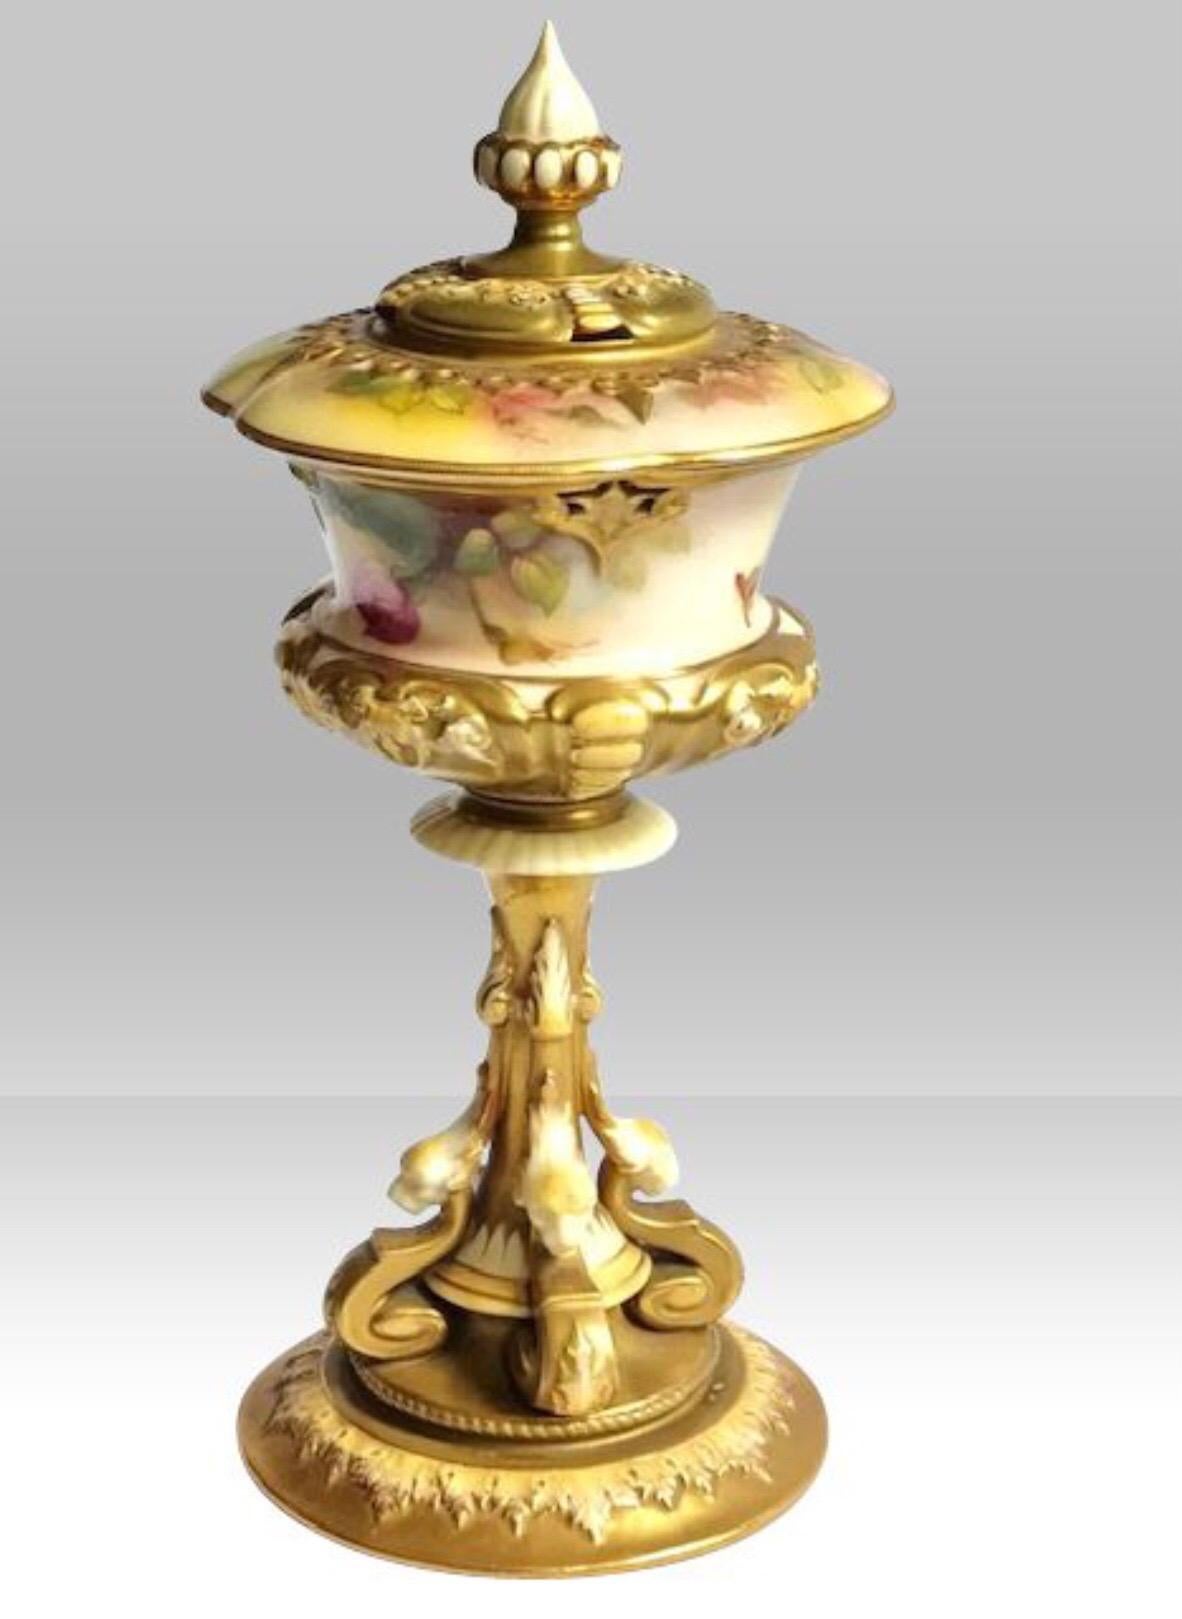 Fabulous antique Royal Worcester pedestal pot pourri vase with cover of lobed baluster form with bead and strap work moulded lower section, the waisted pedestal supported by four scrolls surmounted by lion masks on a domed base, painted with pink